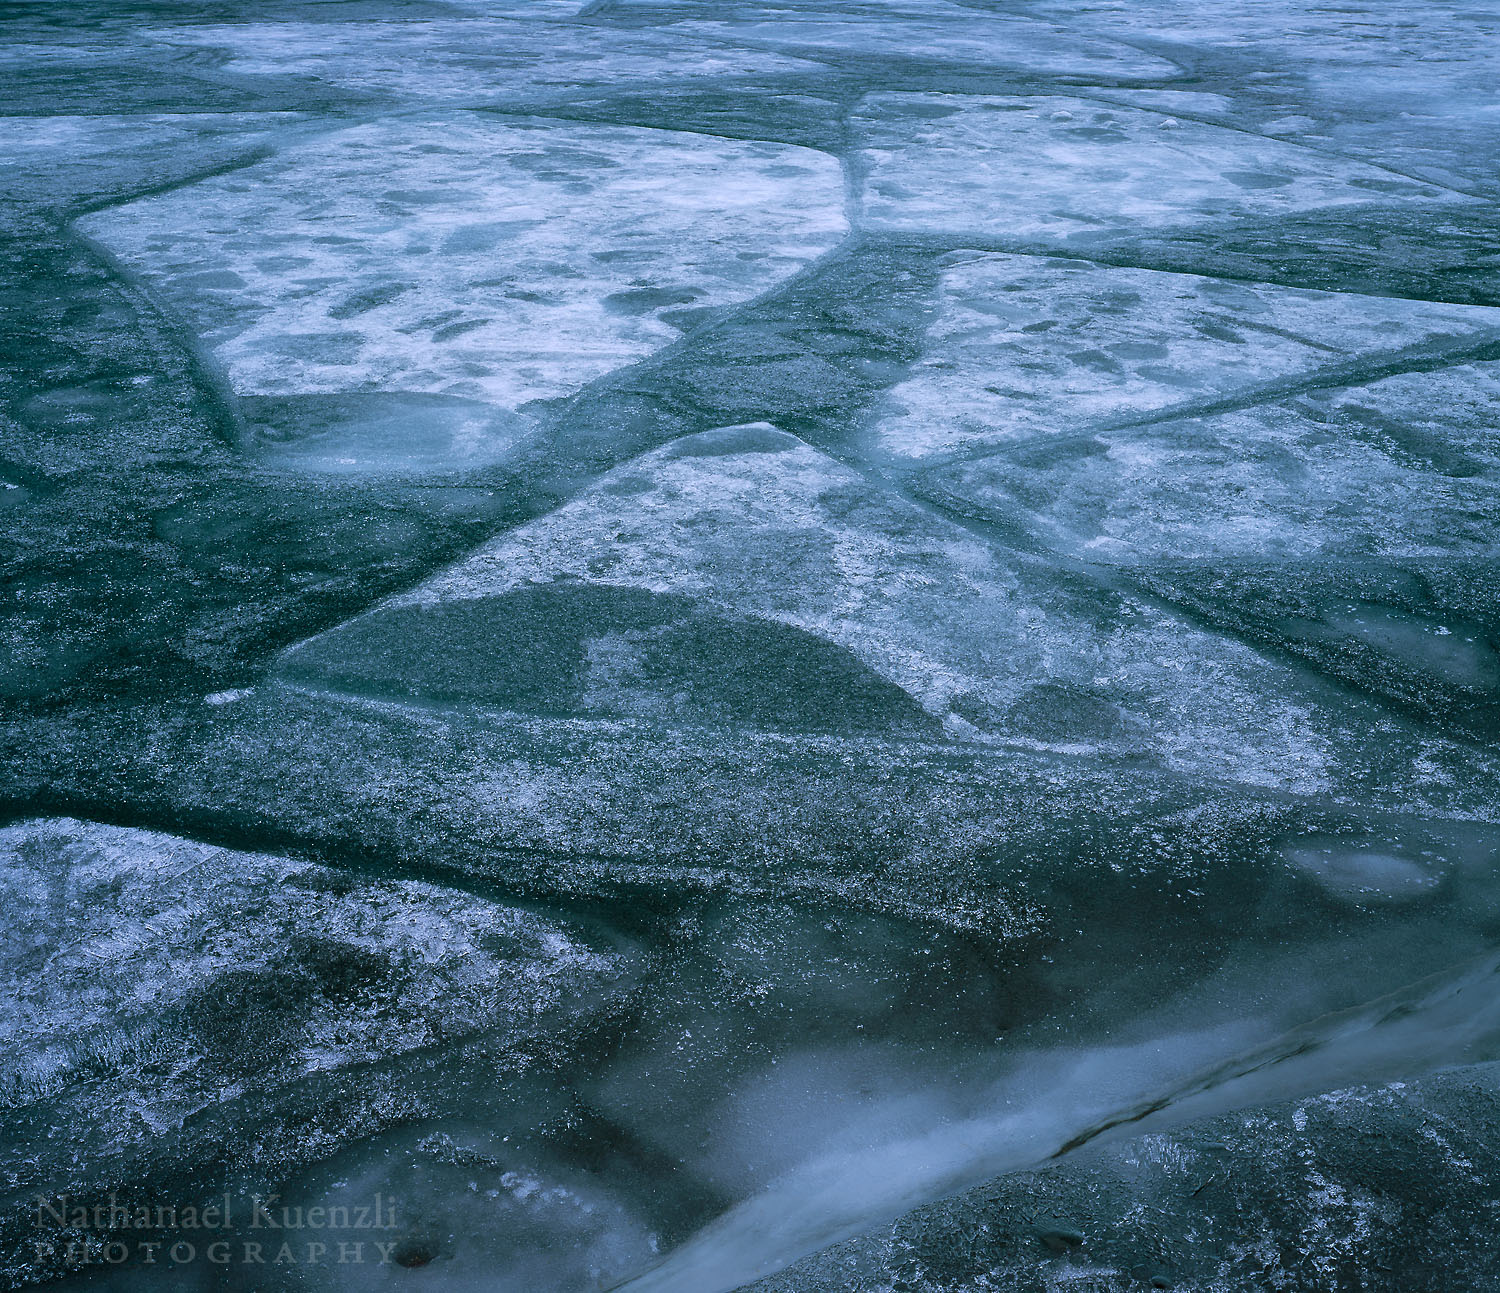   Lake Superior Ice, Grand Portage State Forest, Minnesota, March 2003  